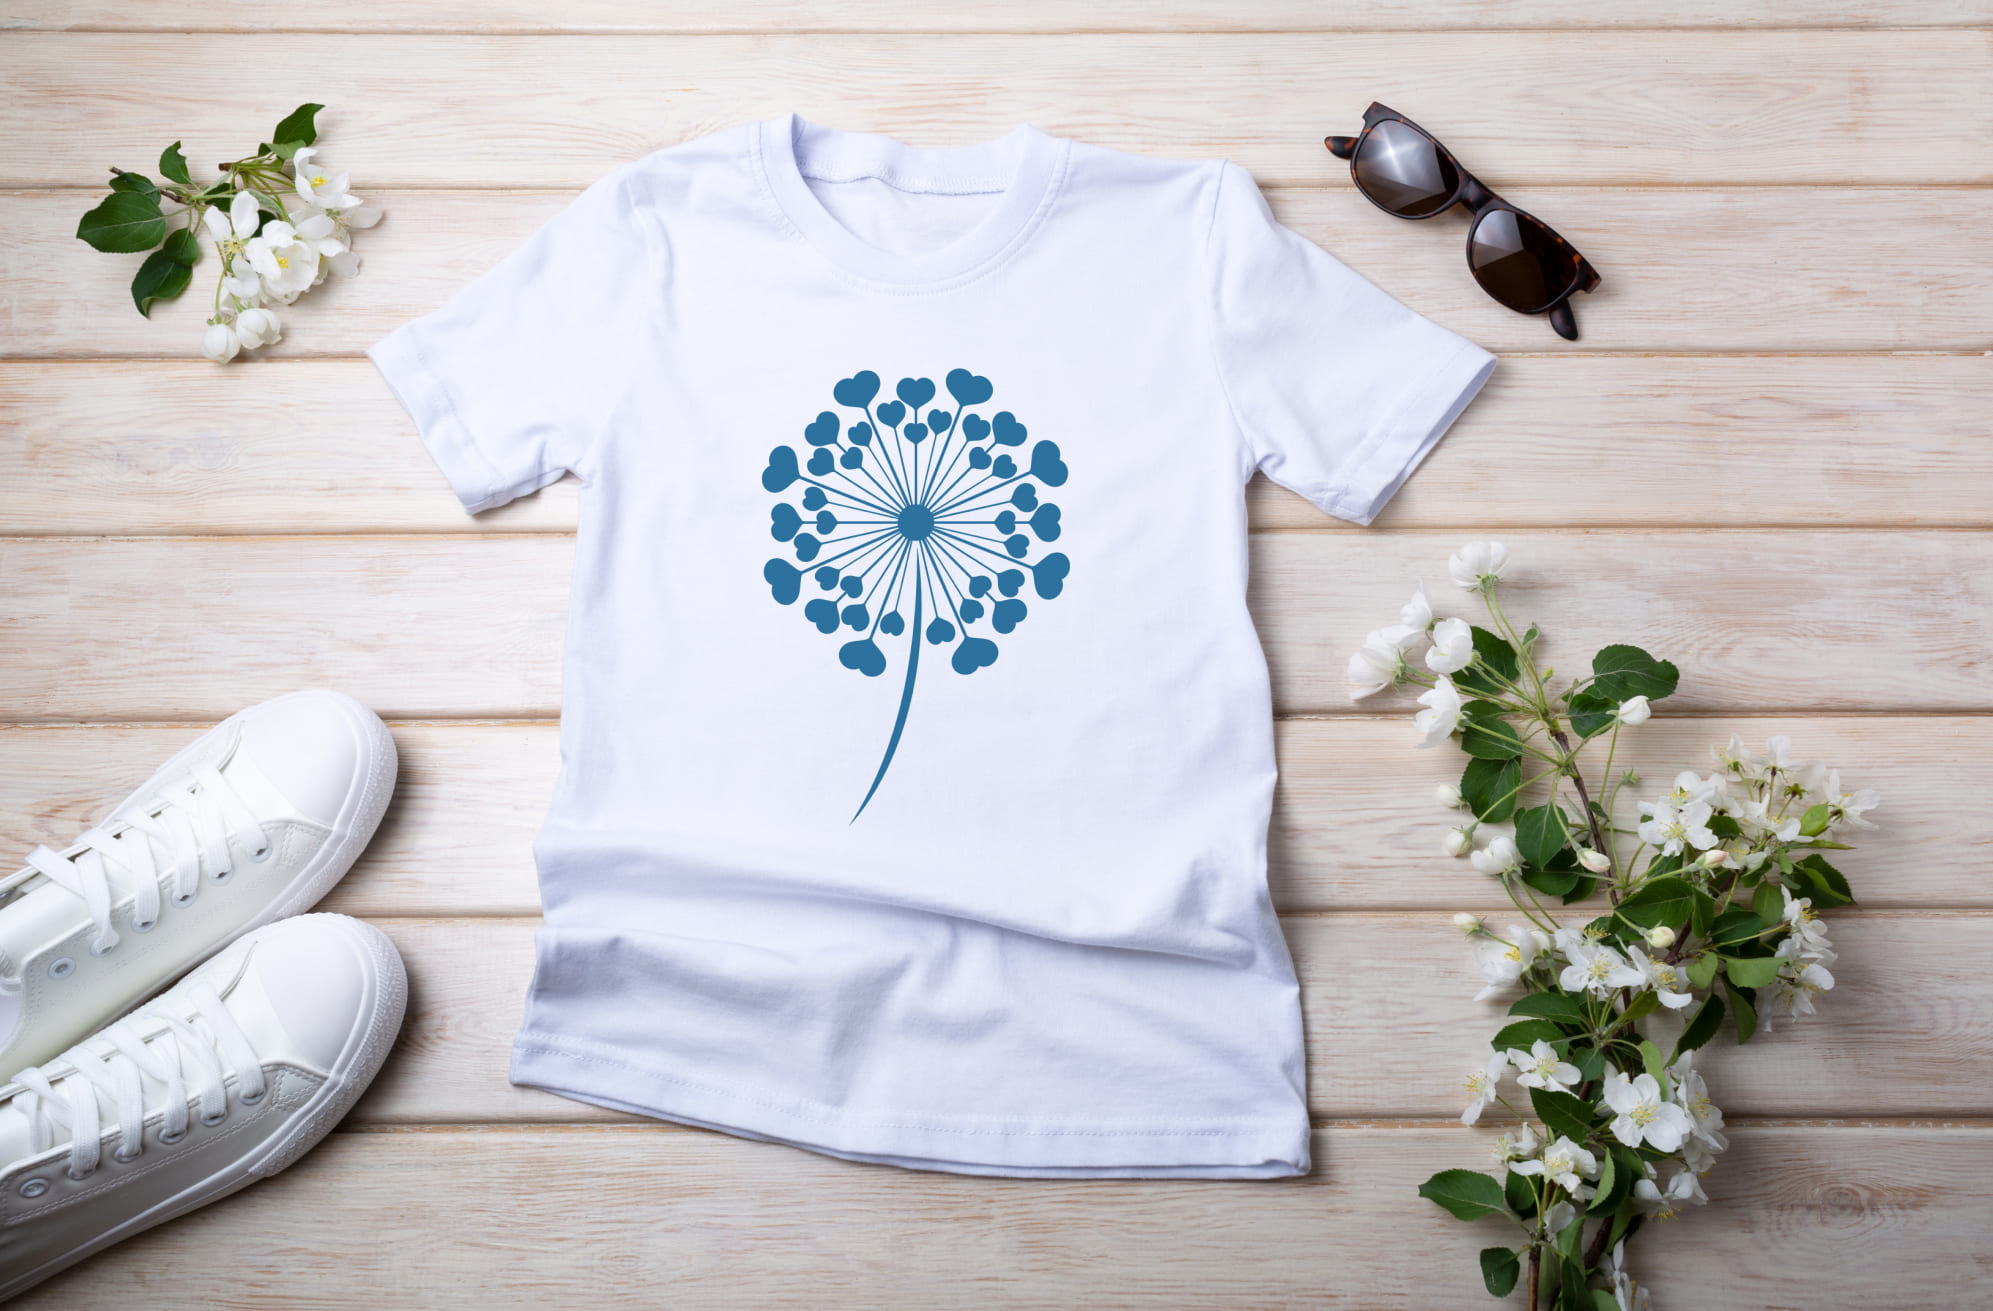 White T-shirt with blue dandelion flower and sunglasses with white sneakers.